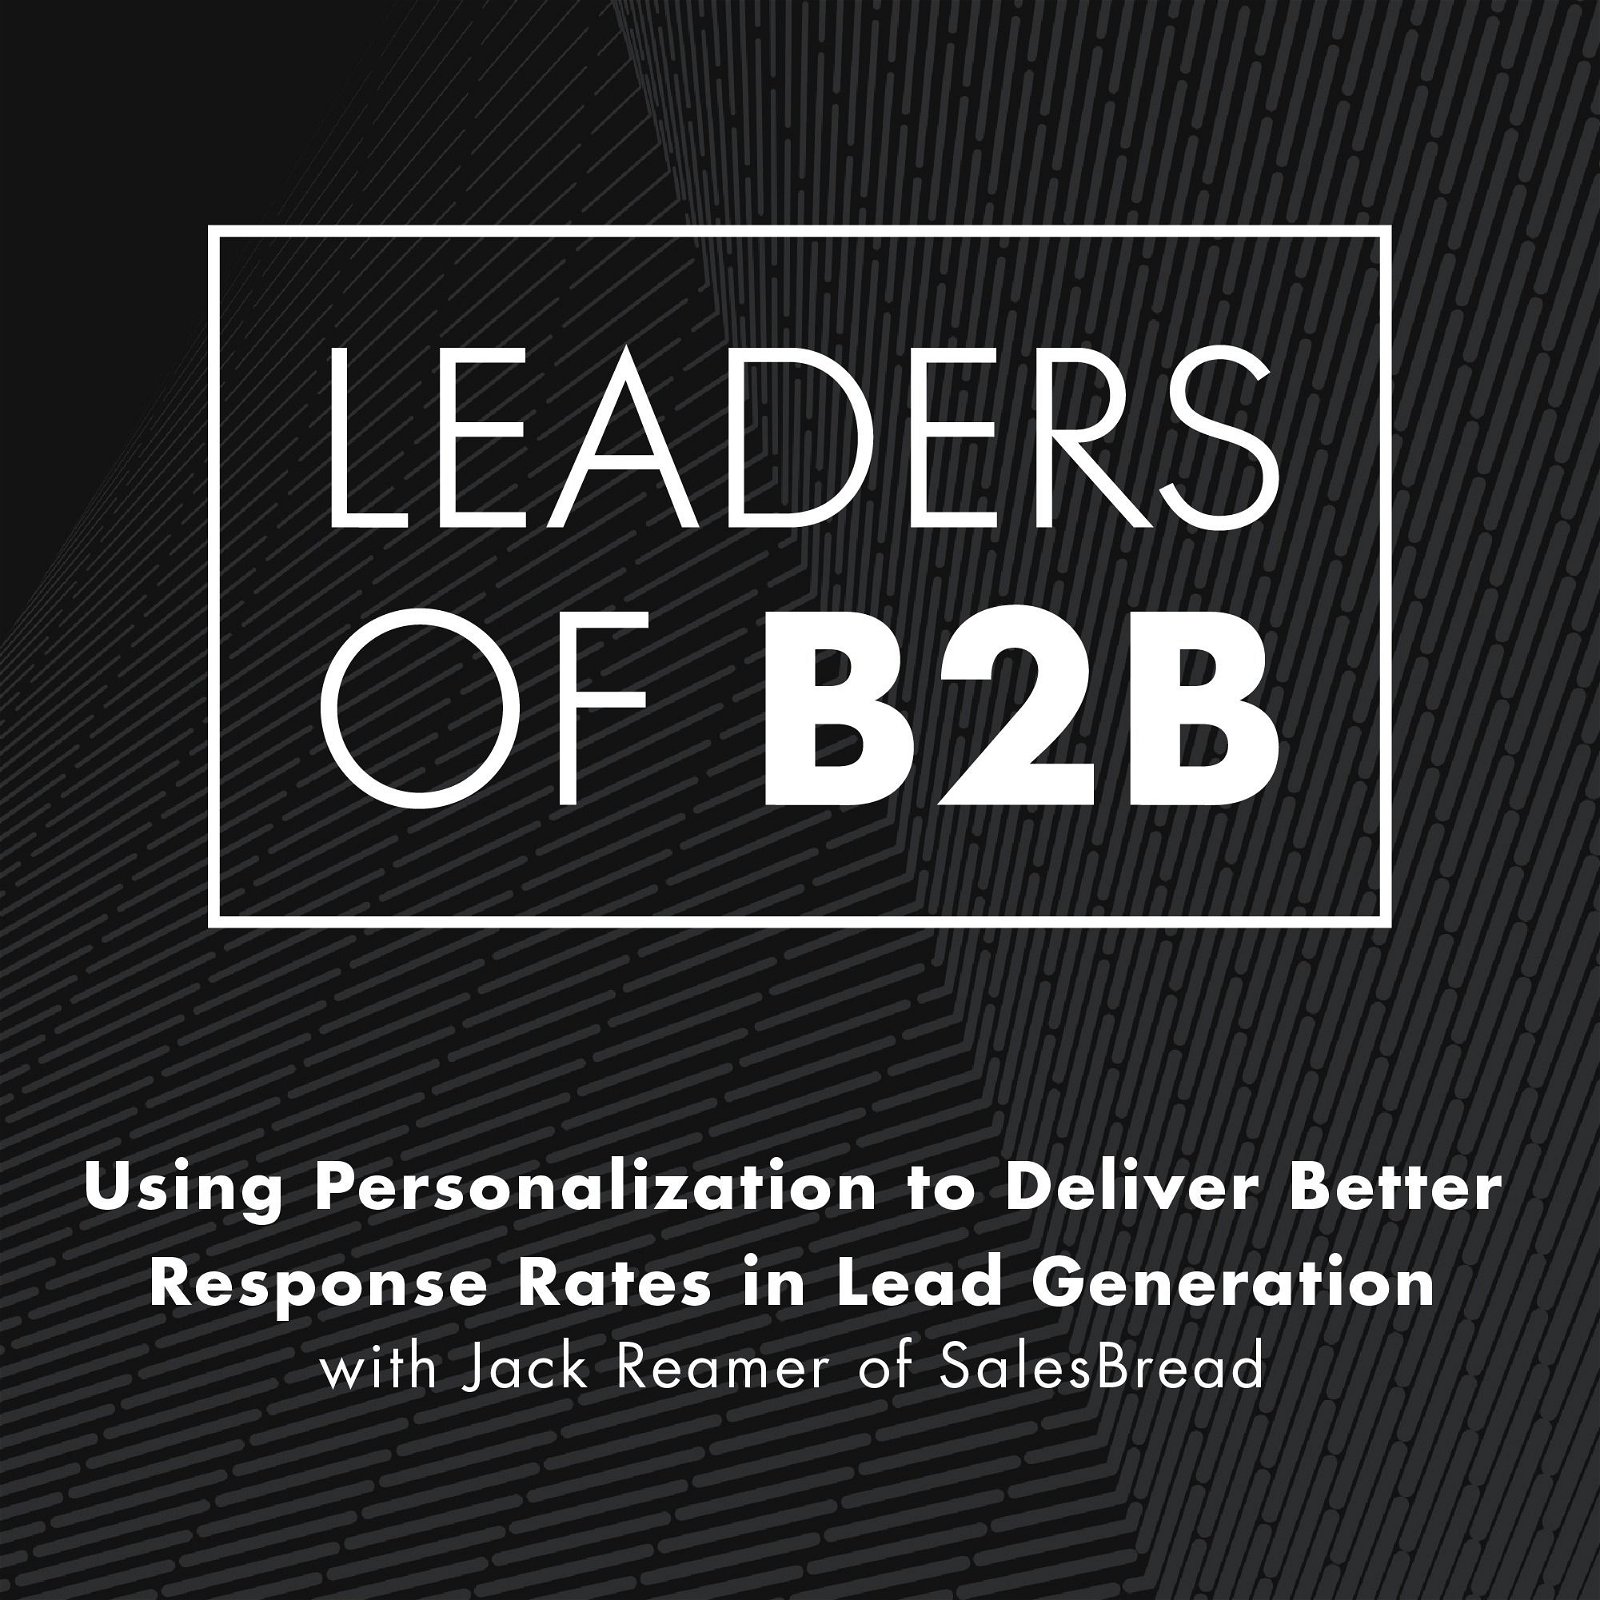 Using Personalization to Deliver Better Response Rates in Lead Generation with Jack Reamer of SalesBread